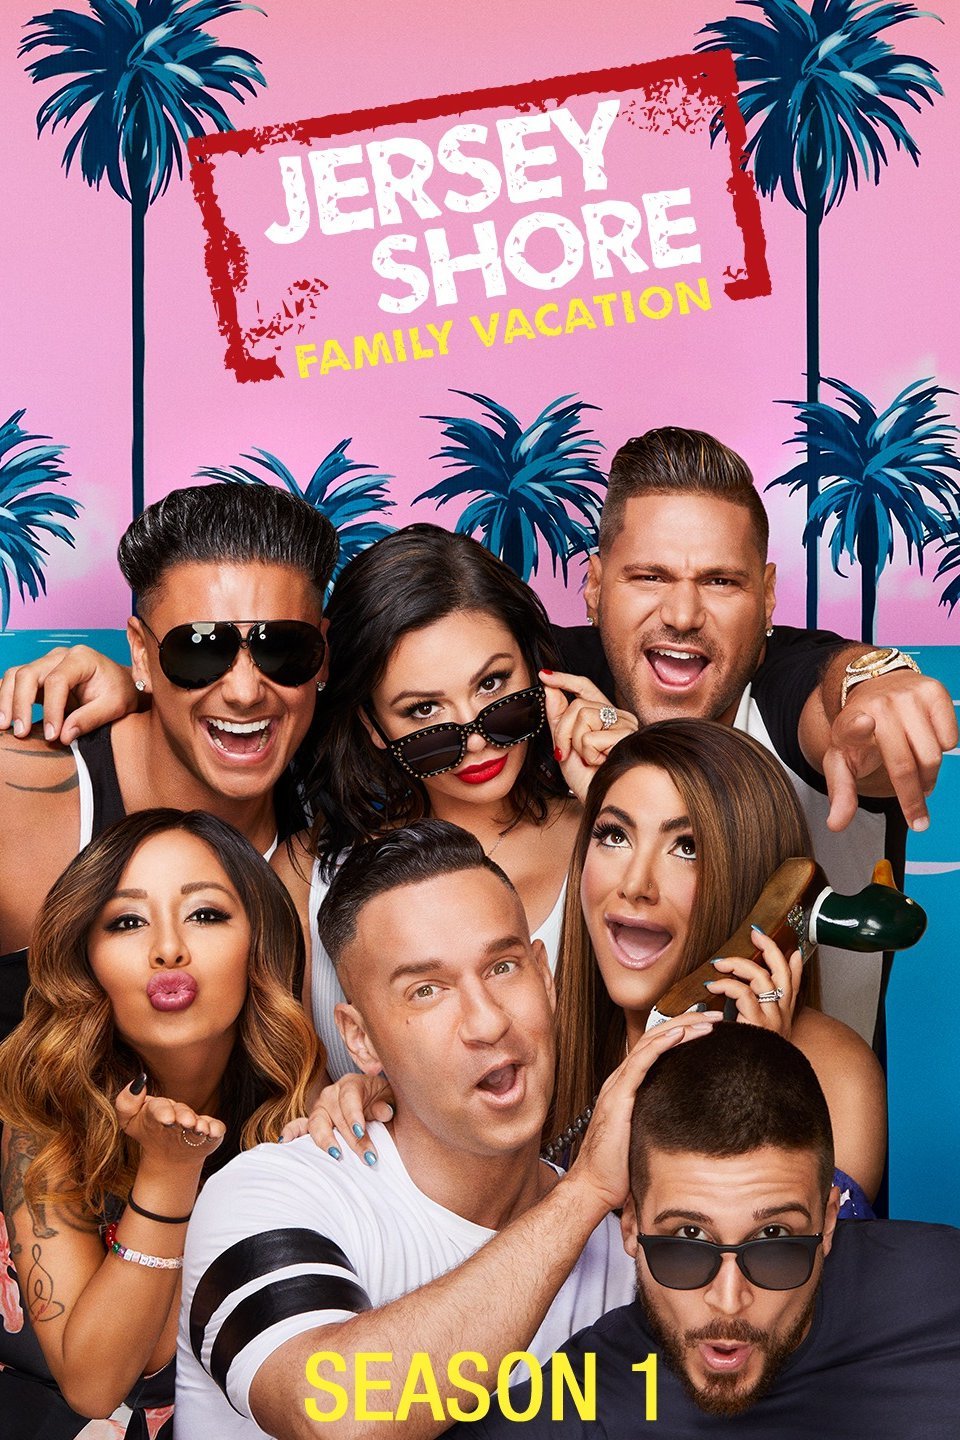 fluctueren slachtoffers Enzovoorts Jersey Shore: Family Vacation - Rotten Tomatoes